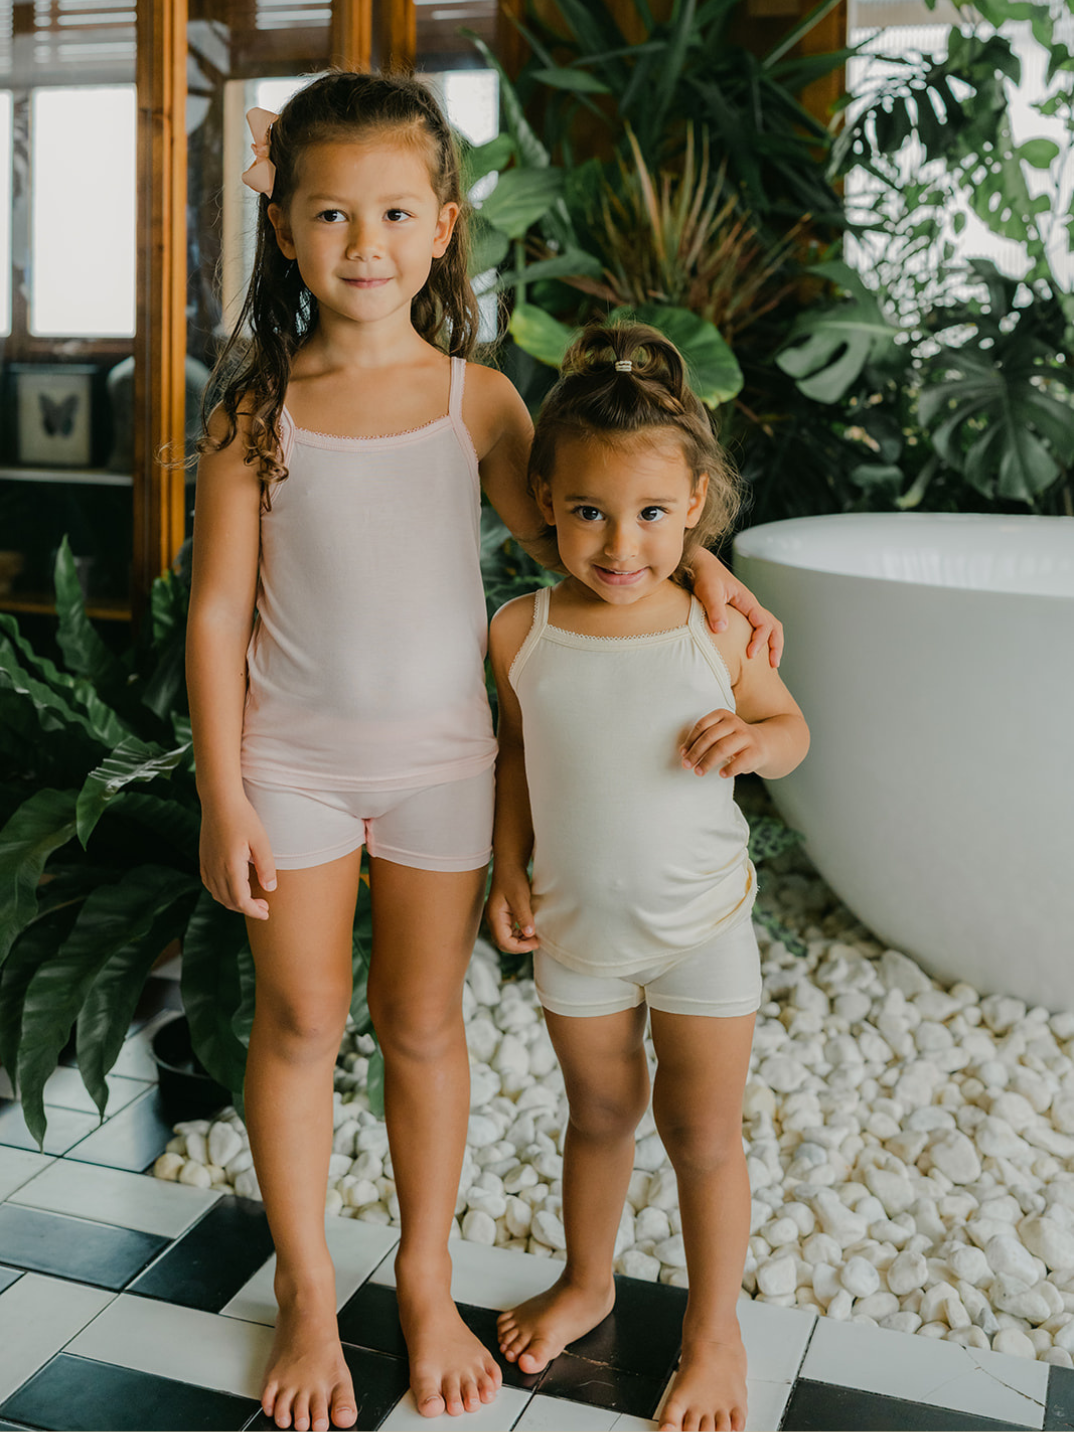 Just Peachy Camisoles are super soft and gentle on your little ones' skin. Designed with a snug fit for play, movement and a comfy night's rest. Add the breathable Camisole layer under your day clothes or snooze in maximum comfort. Pink and cream children's camis. Comes in a 2-pack